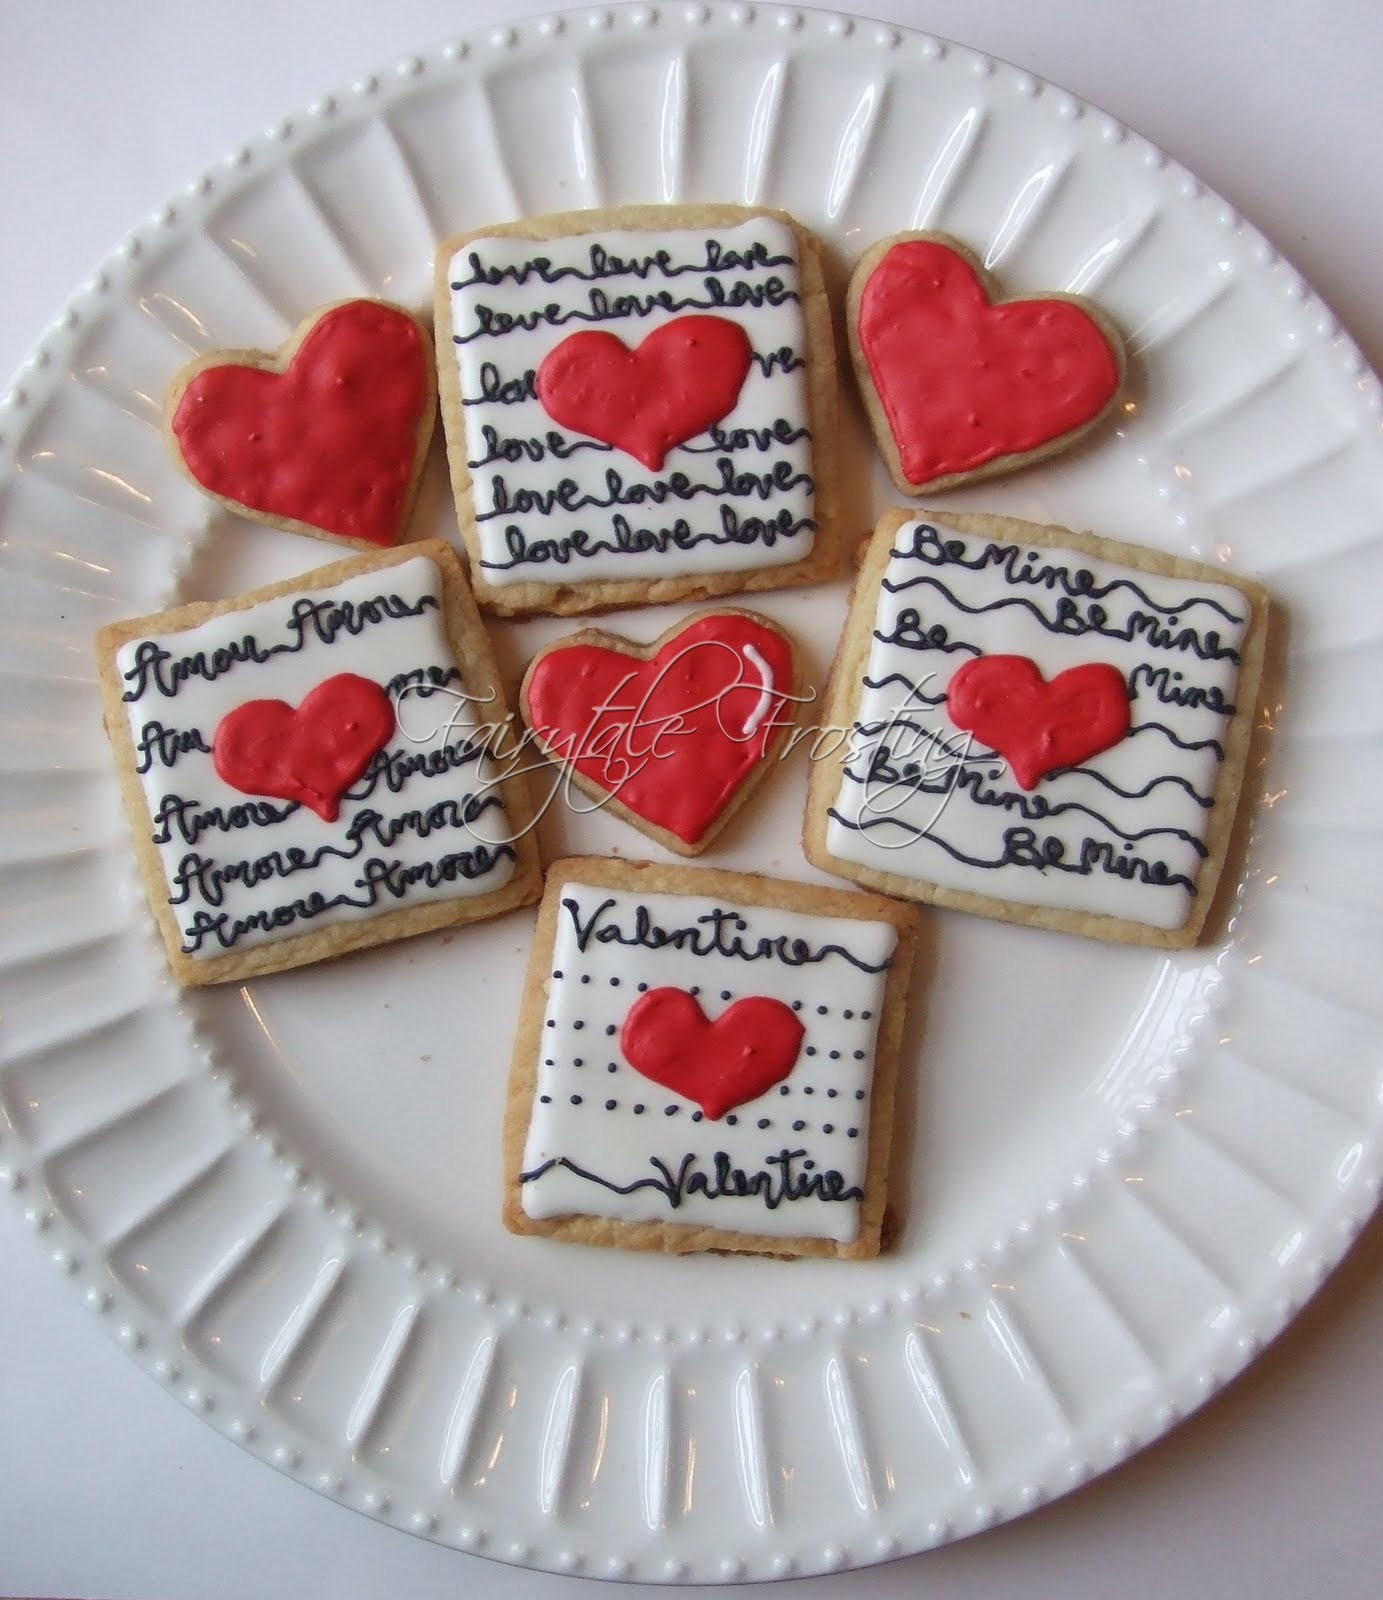 Valentines Day Cookies Delivery
 Fairytale Frosting Valentine s Cookies